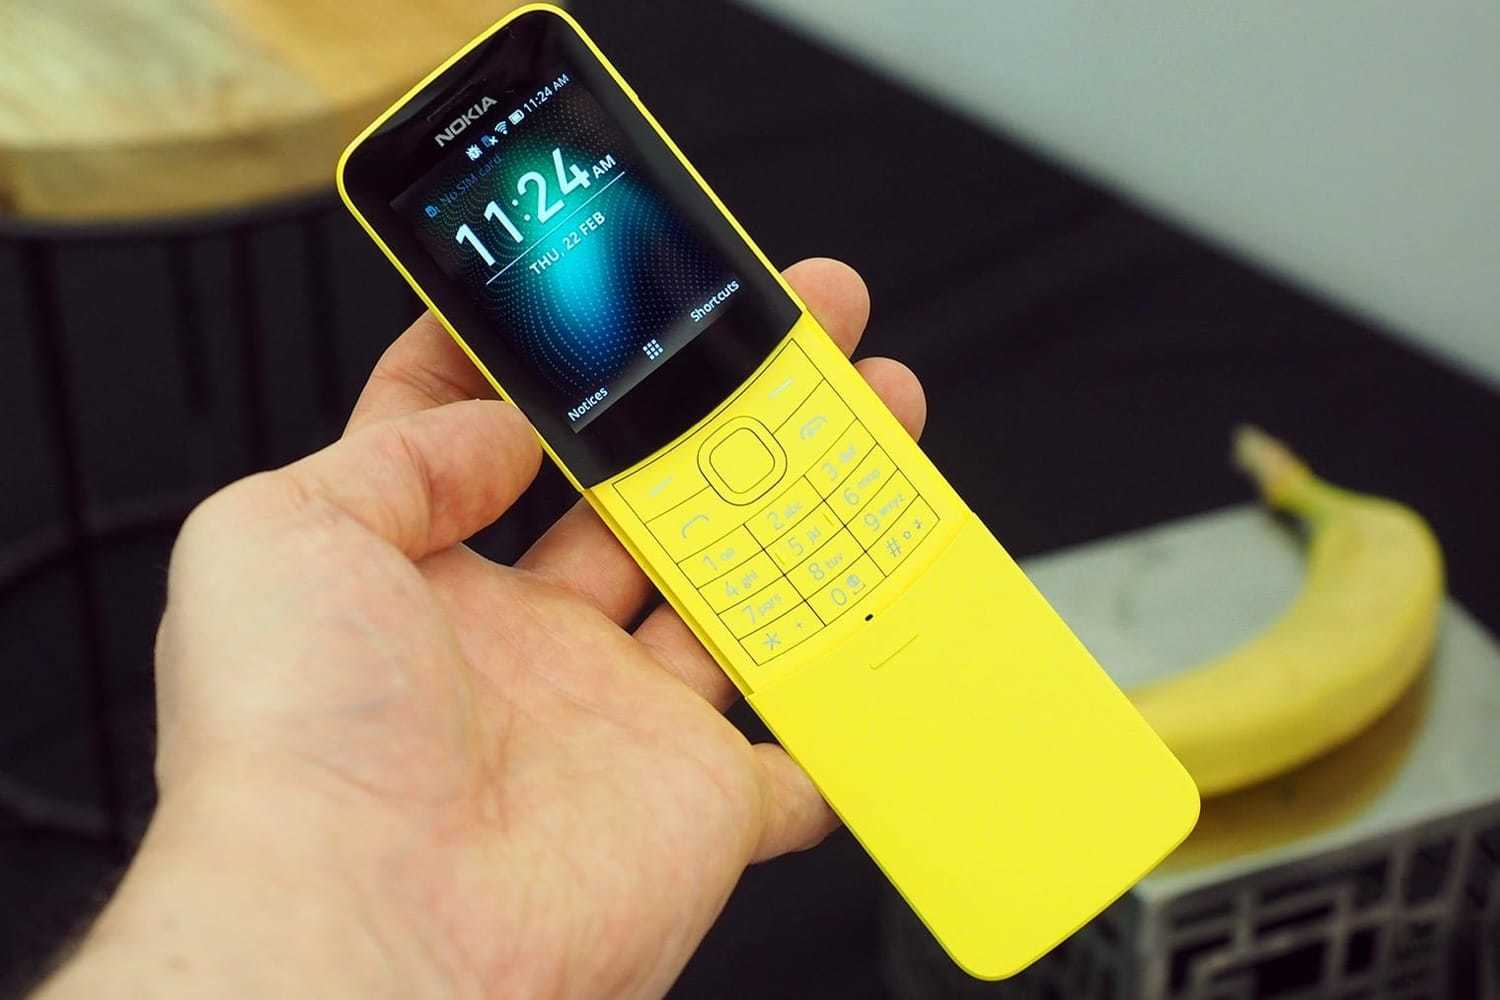 dien thoai nokia 8110 chat luong cao